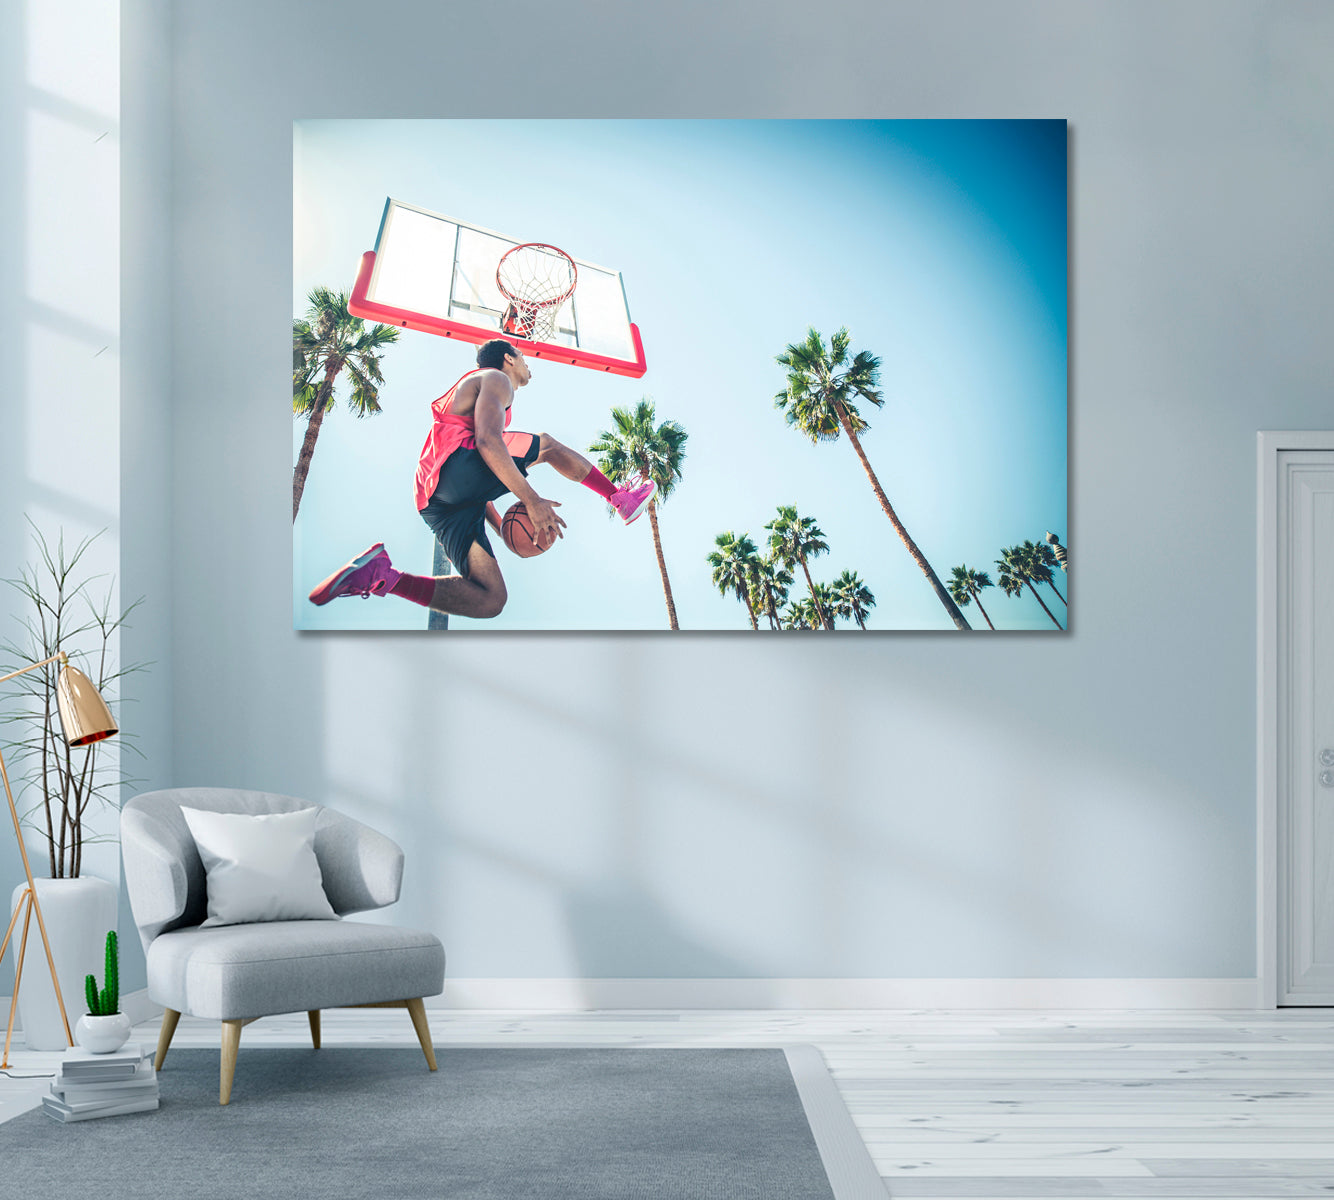 Basketball Player Making a Dunk Canvas Print ArtLexy 1 Panel 24"x16" inches 